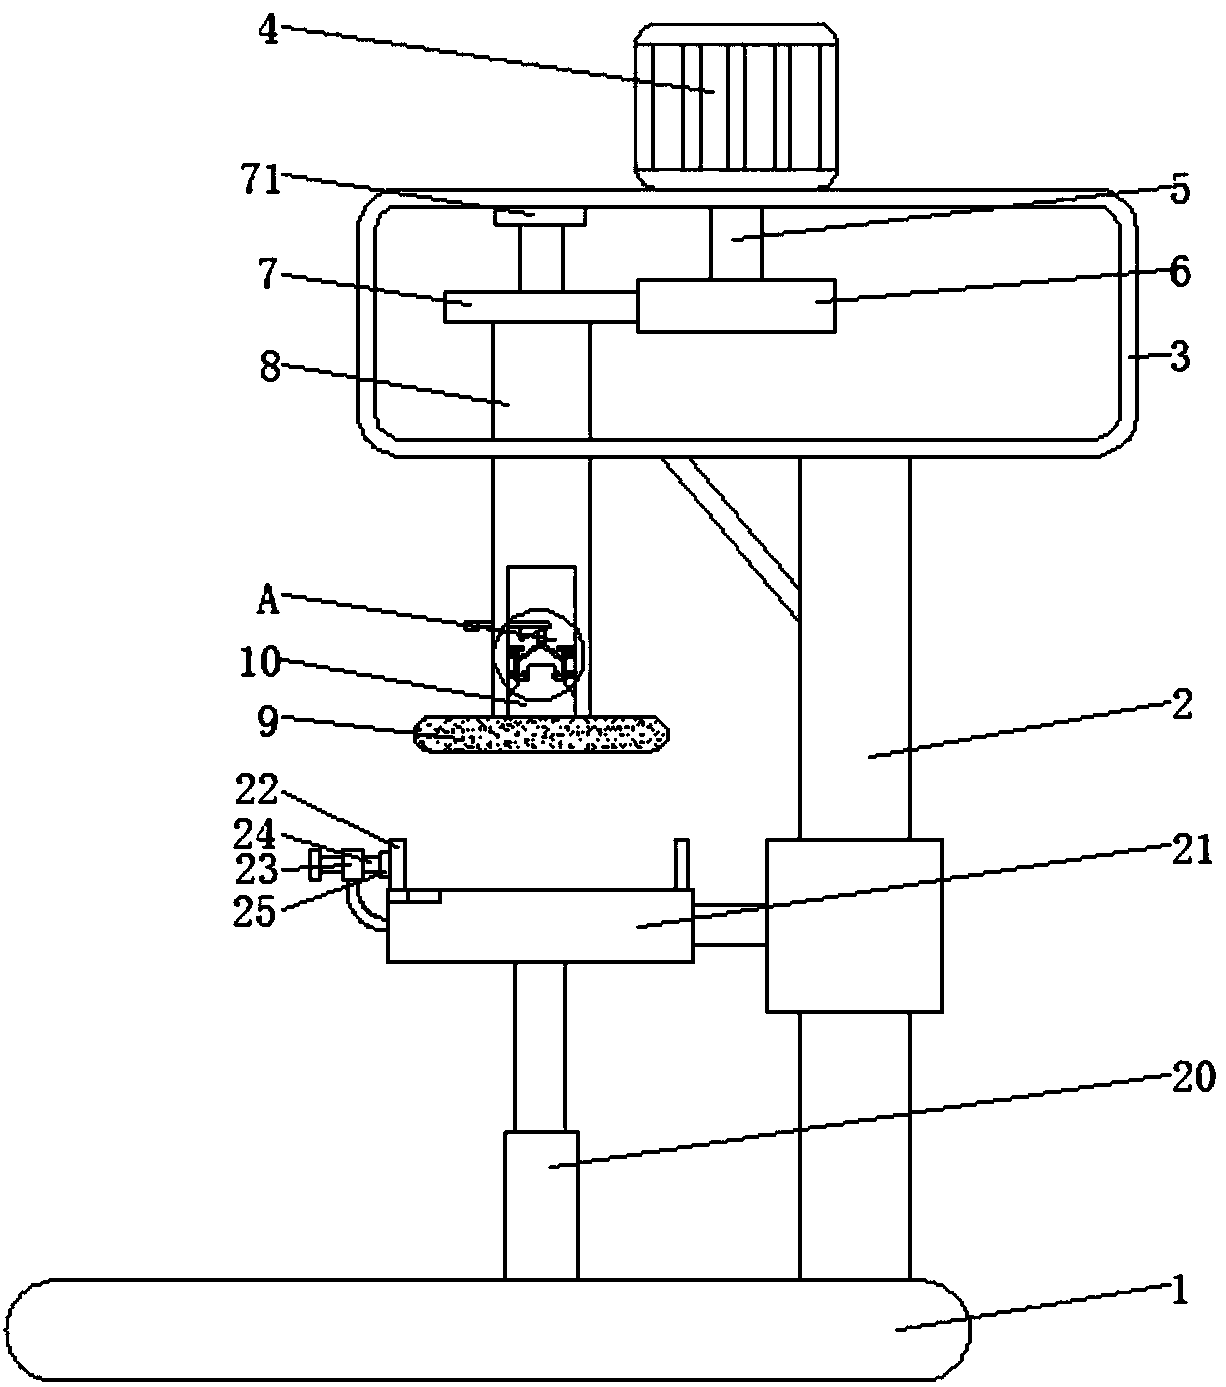 Processing and grinding device for flange plate of water heater